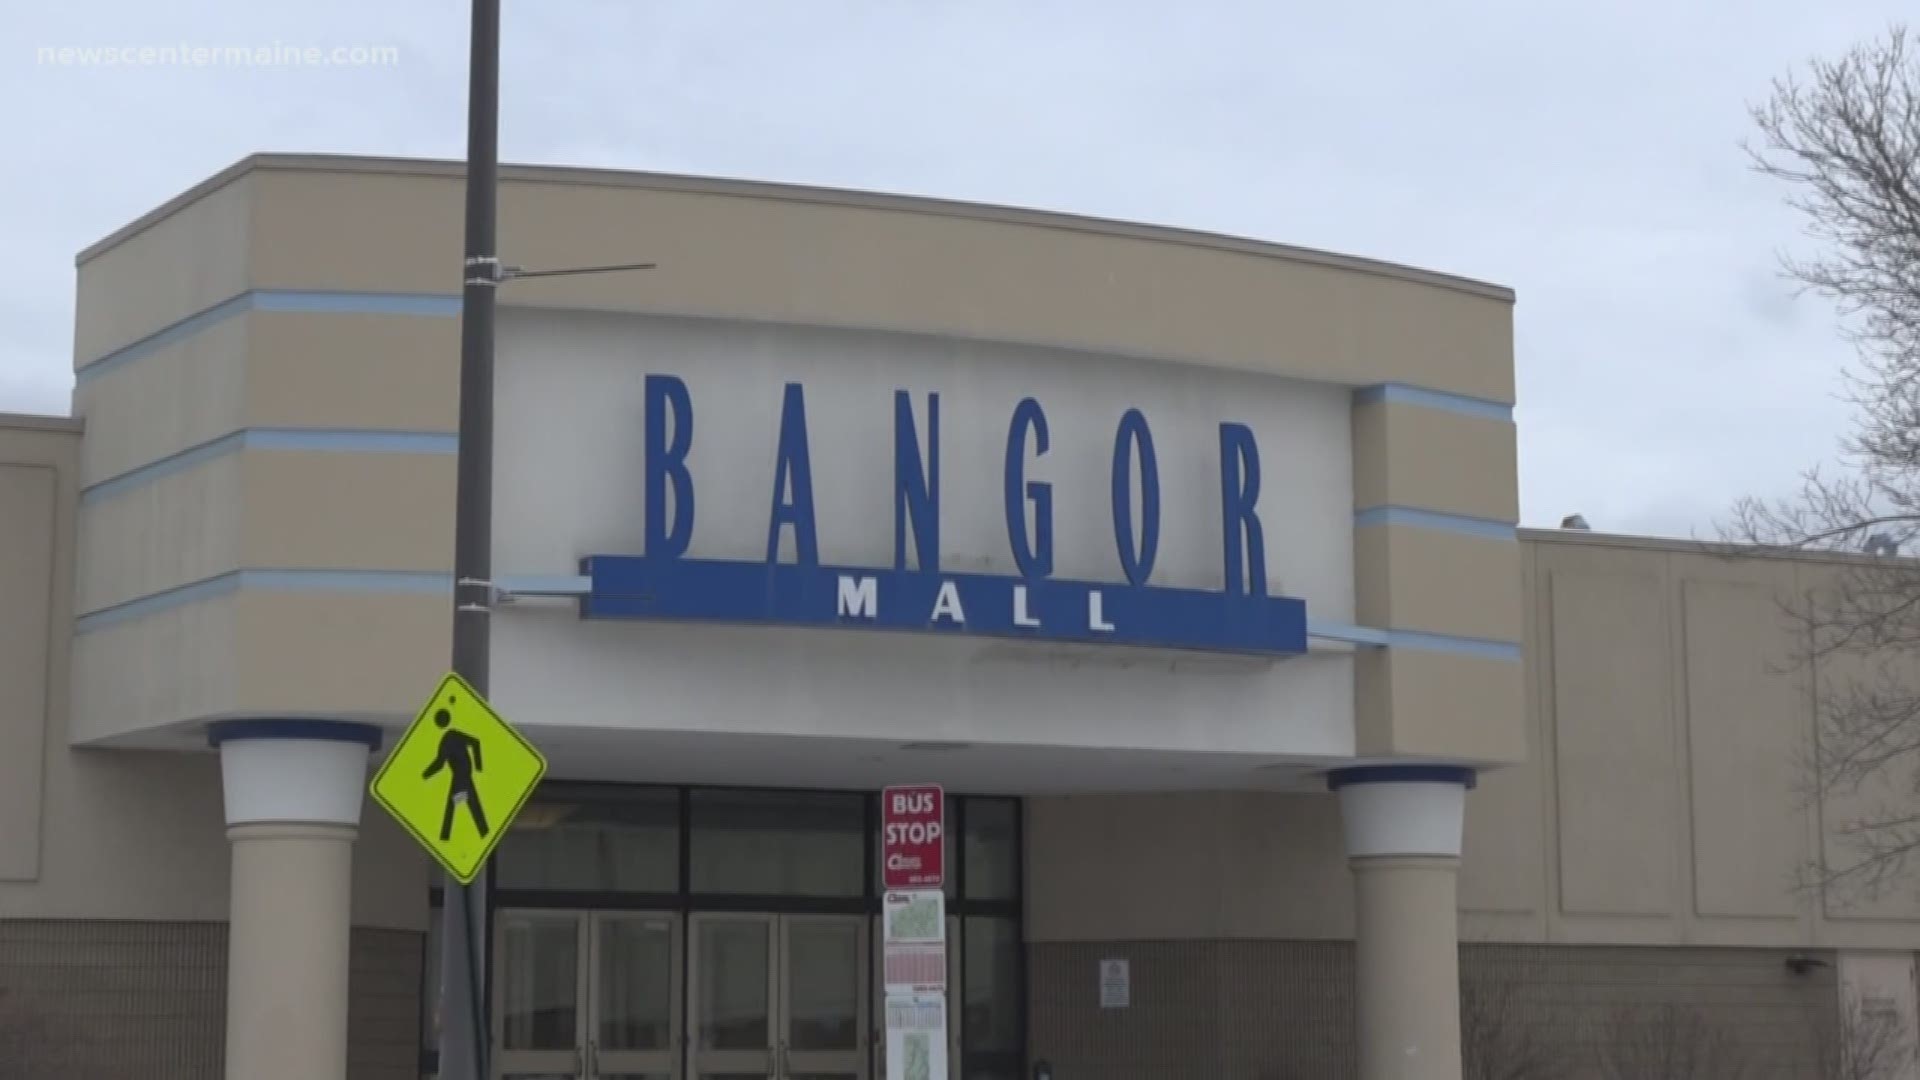 The high bid for the Bangor Mall came in at just under $15 million Wednesday.